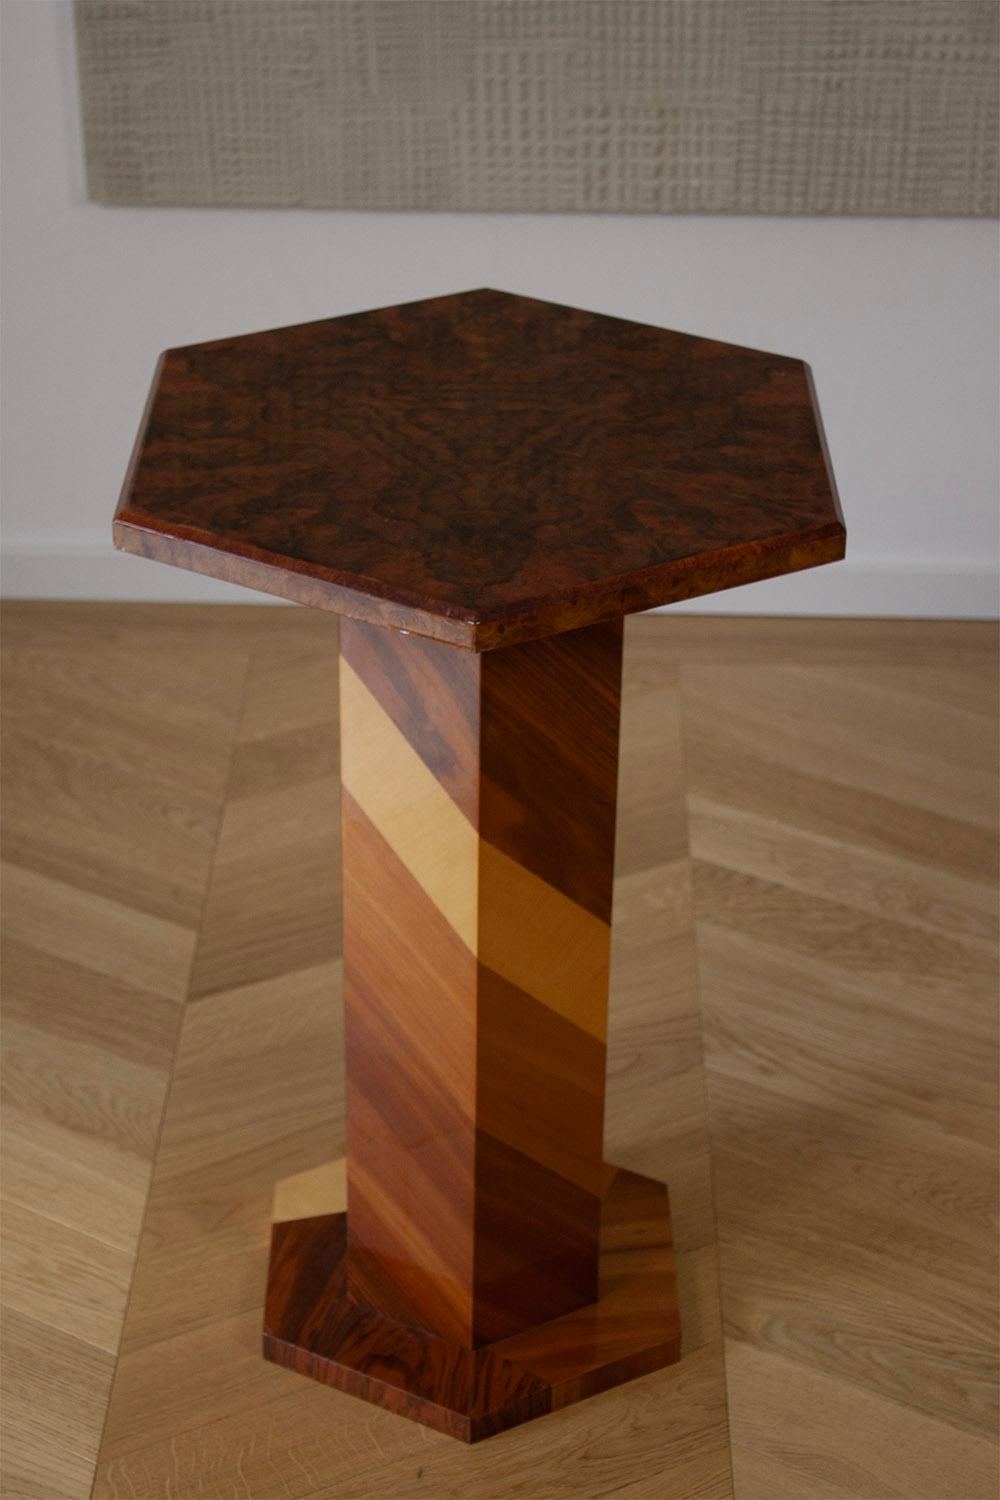 Hand-Carved Striped Artisan Made Wooden Column Table Side Table Pedestal with Burl wood Top For Sale